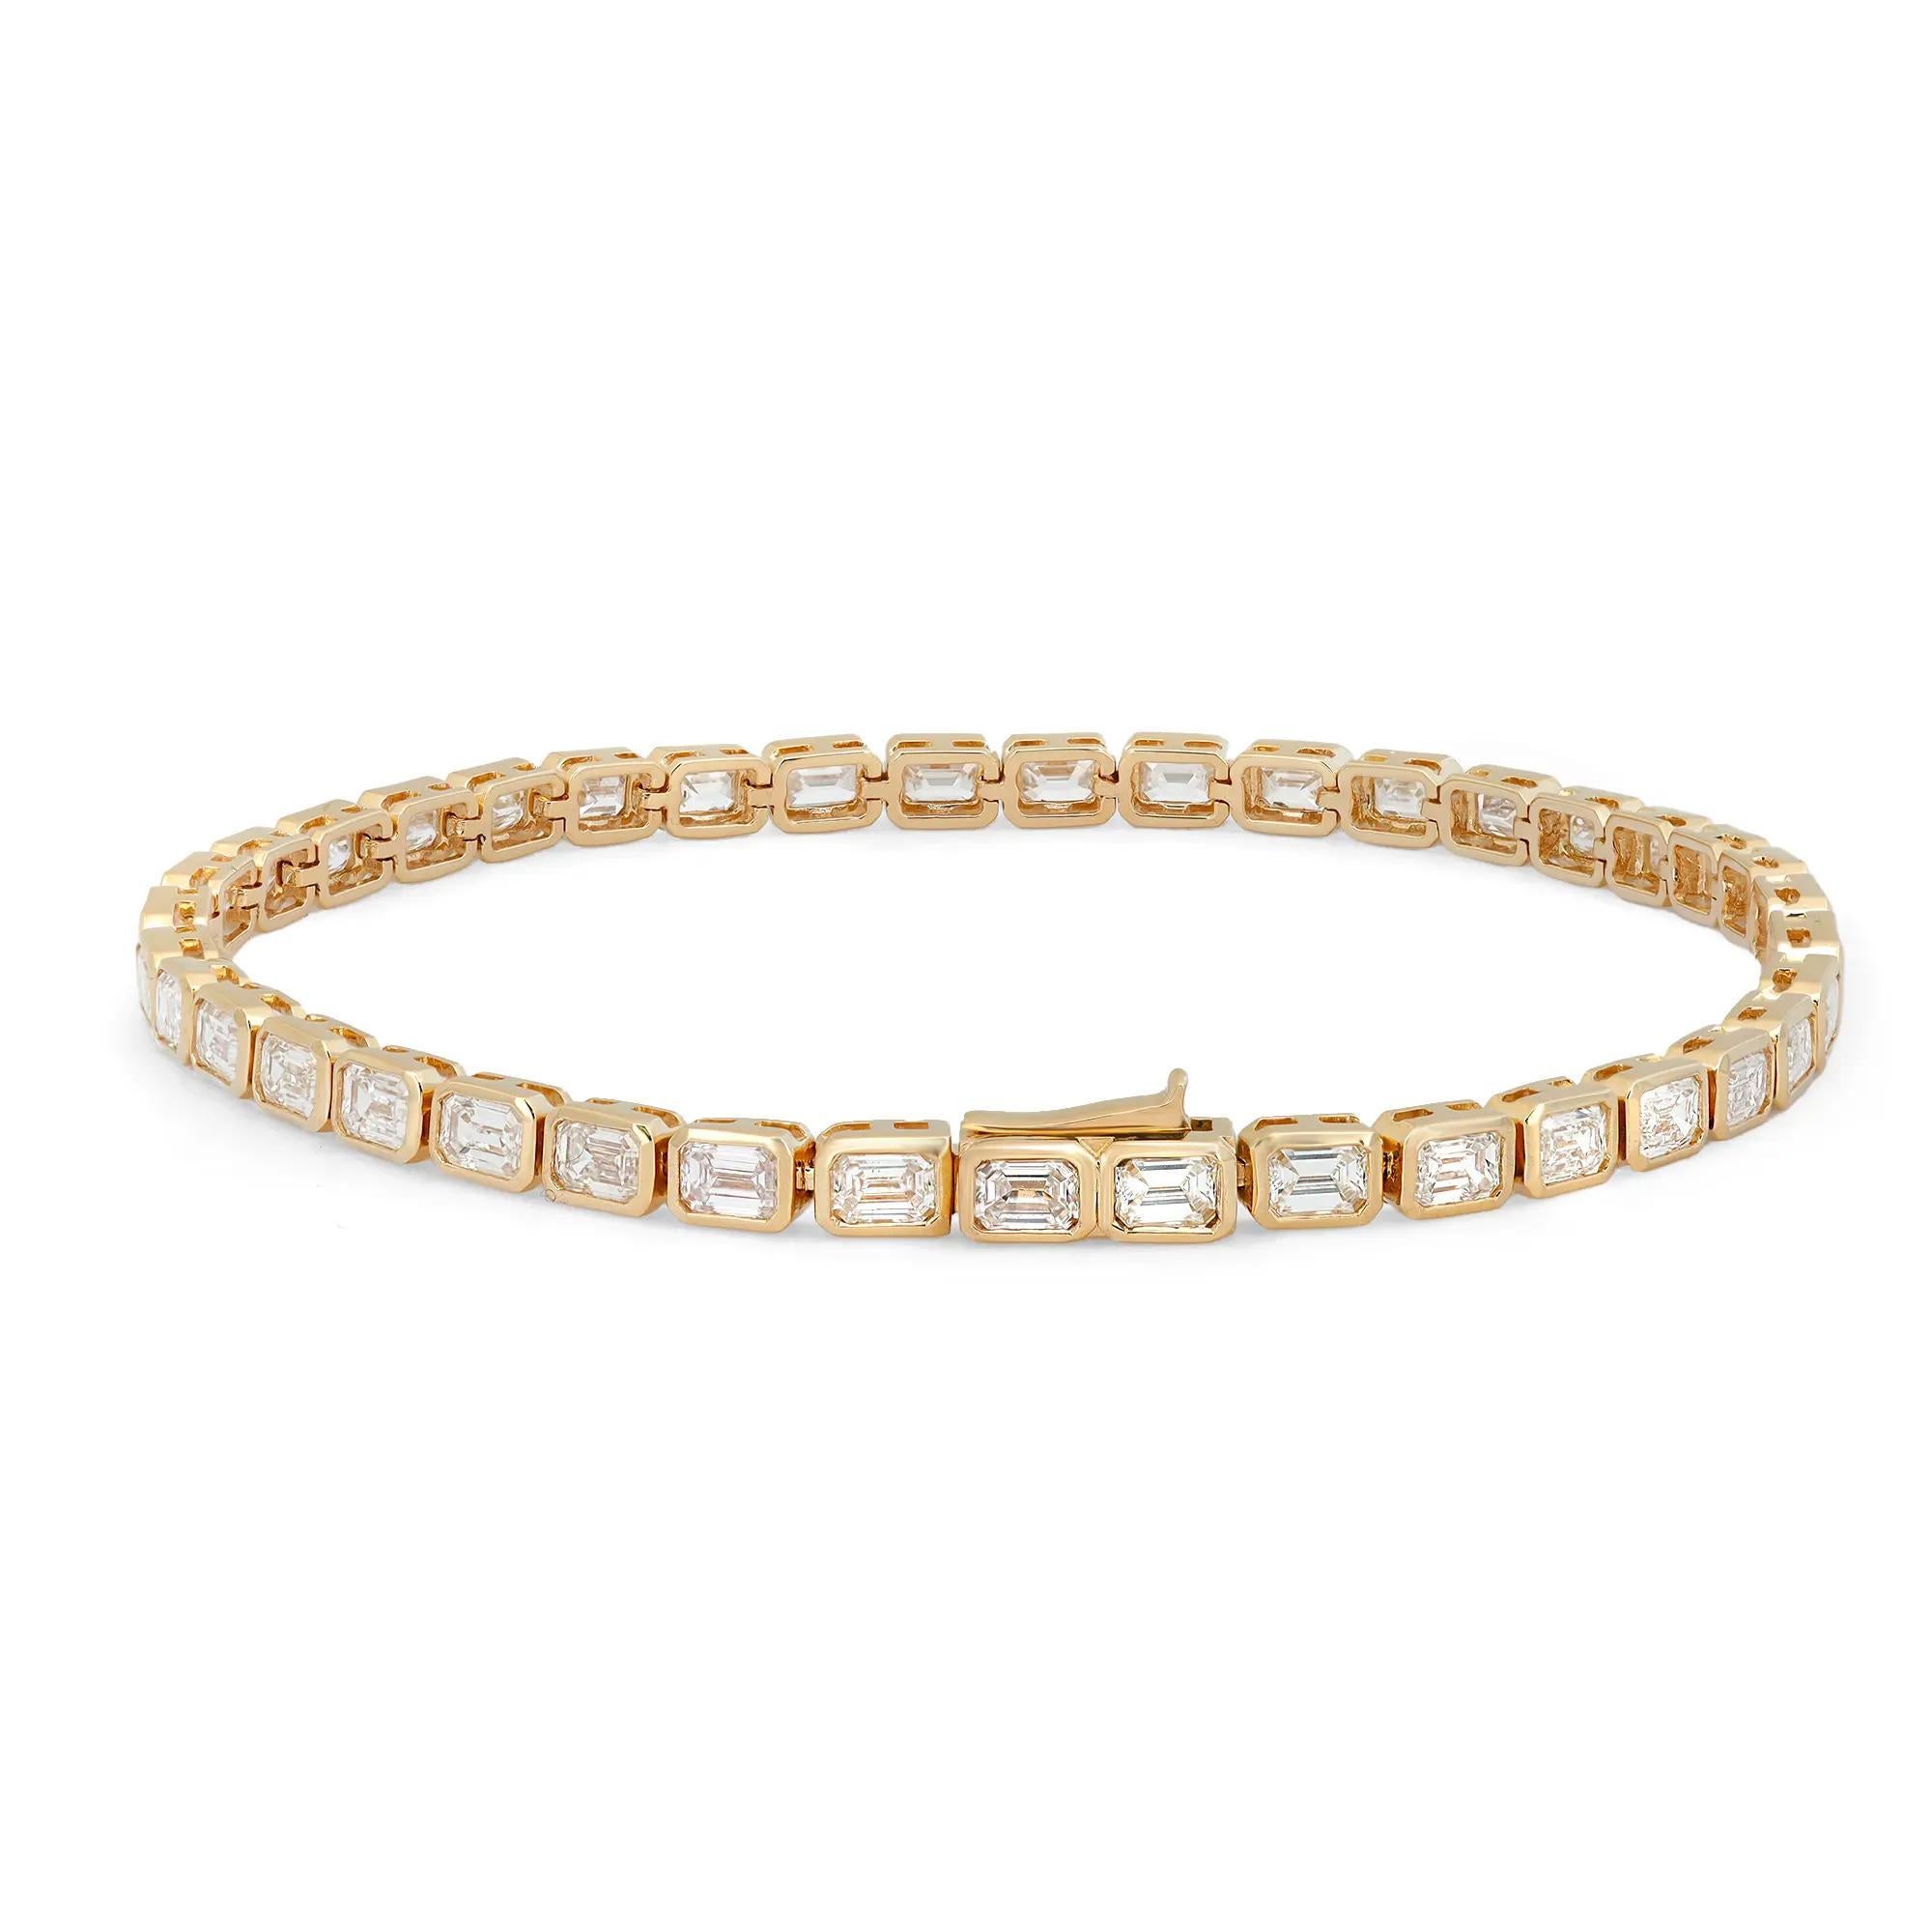 Experience timeless elegance with our 5.16 Carat Emerald Cut Diamond East-West Bezel Tennis Bracelet, meticulously crafted in luxurious 18K yellow gold. This bracelet redefines classic beauty with emerald-cut diamonds set horizontally in bezel